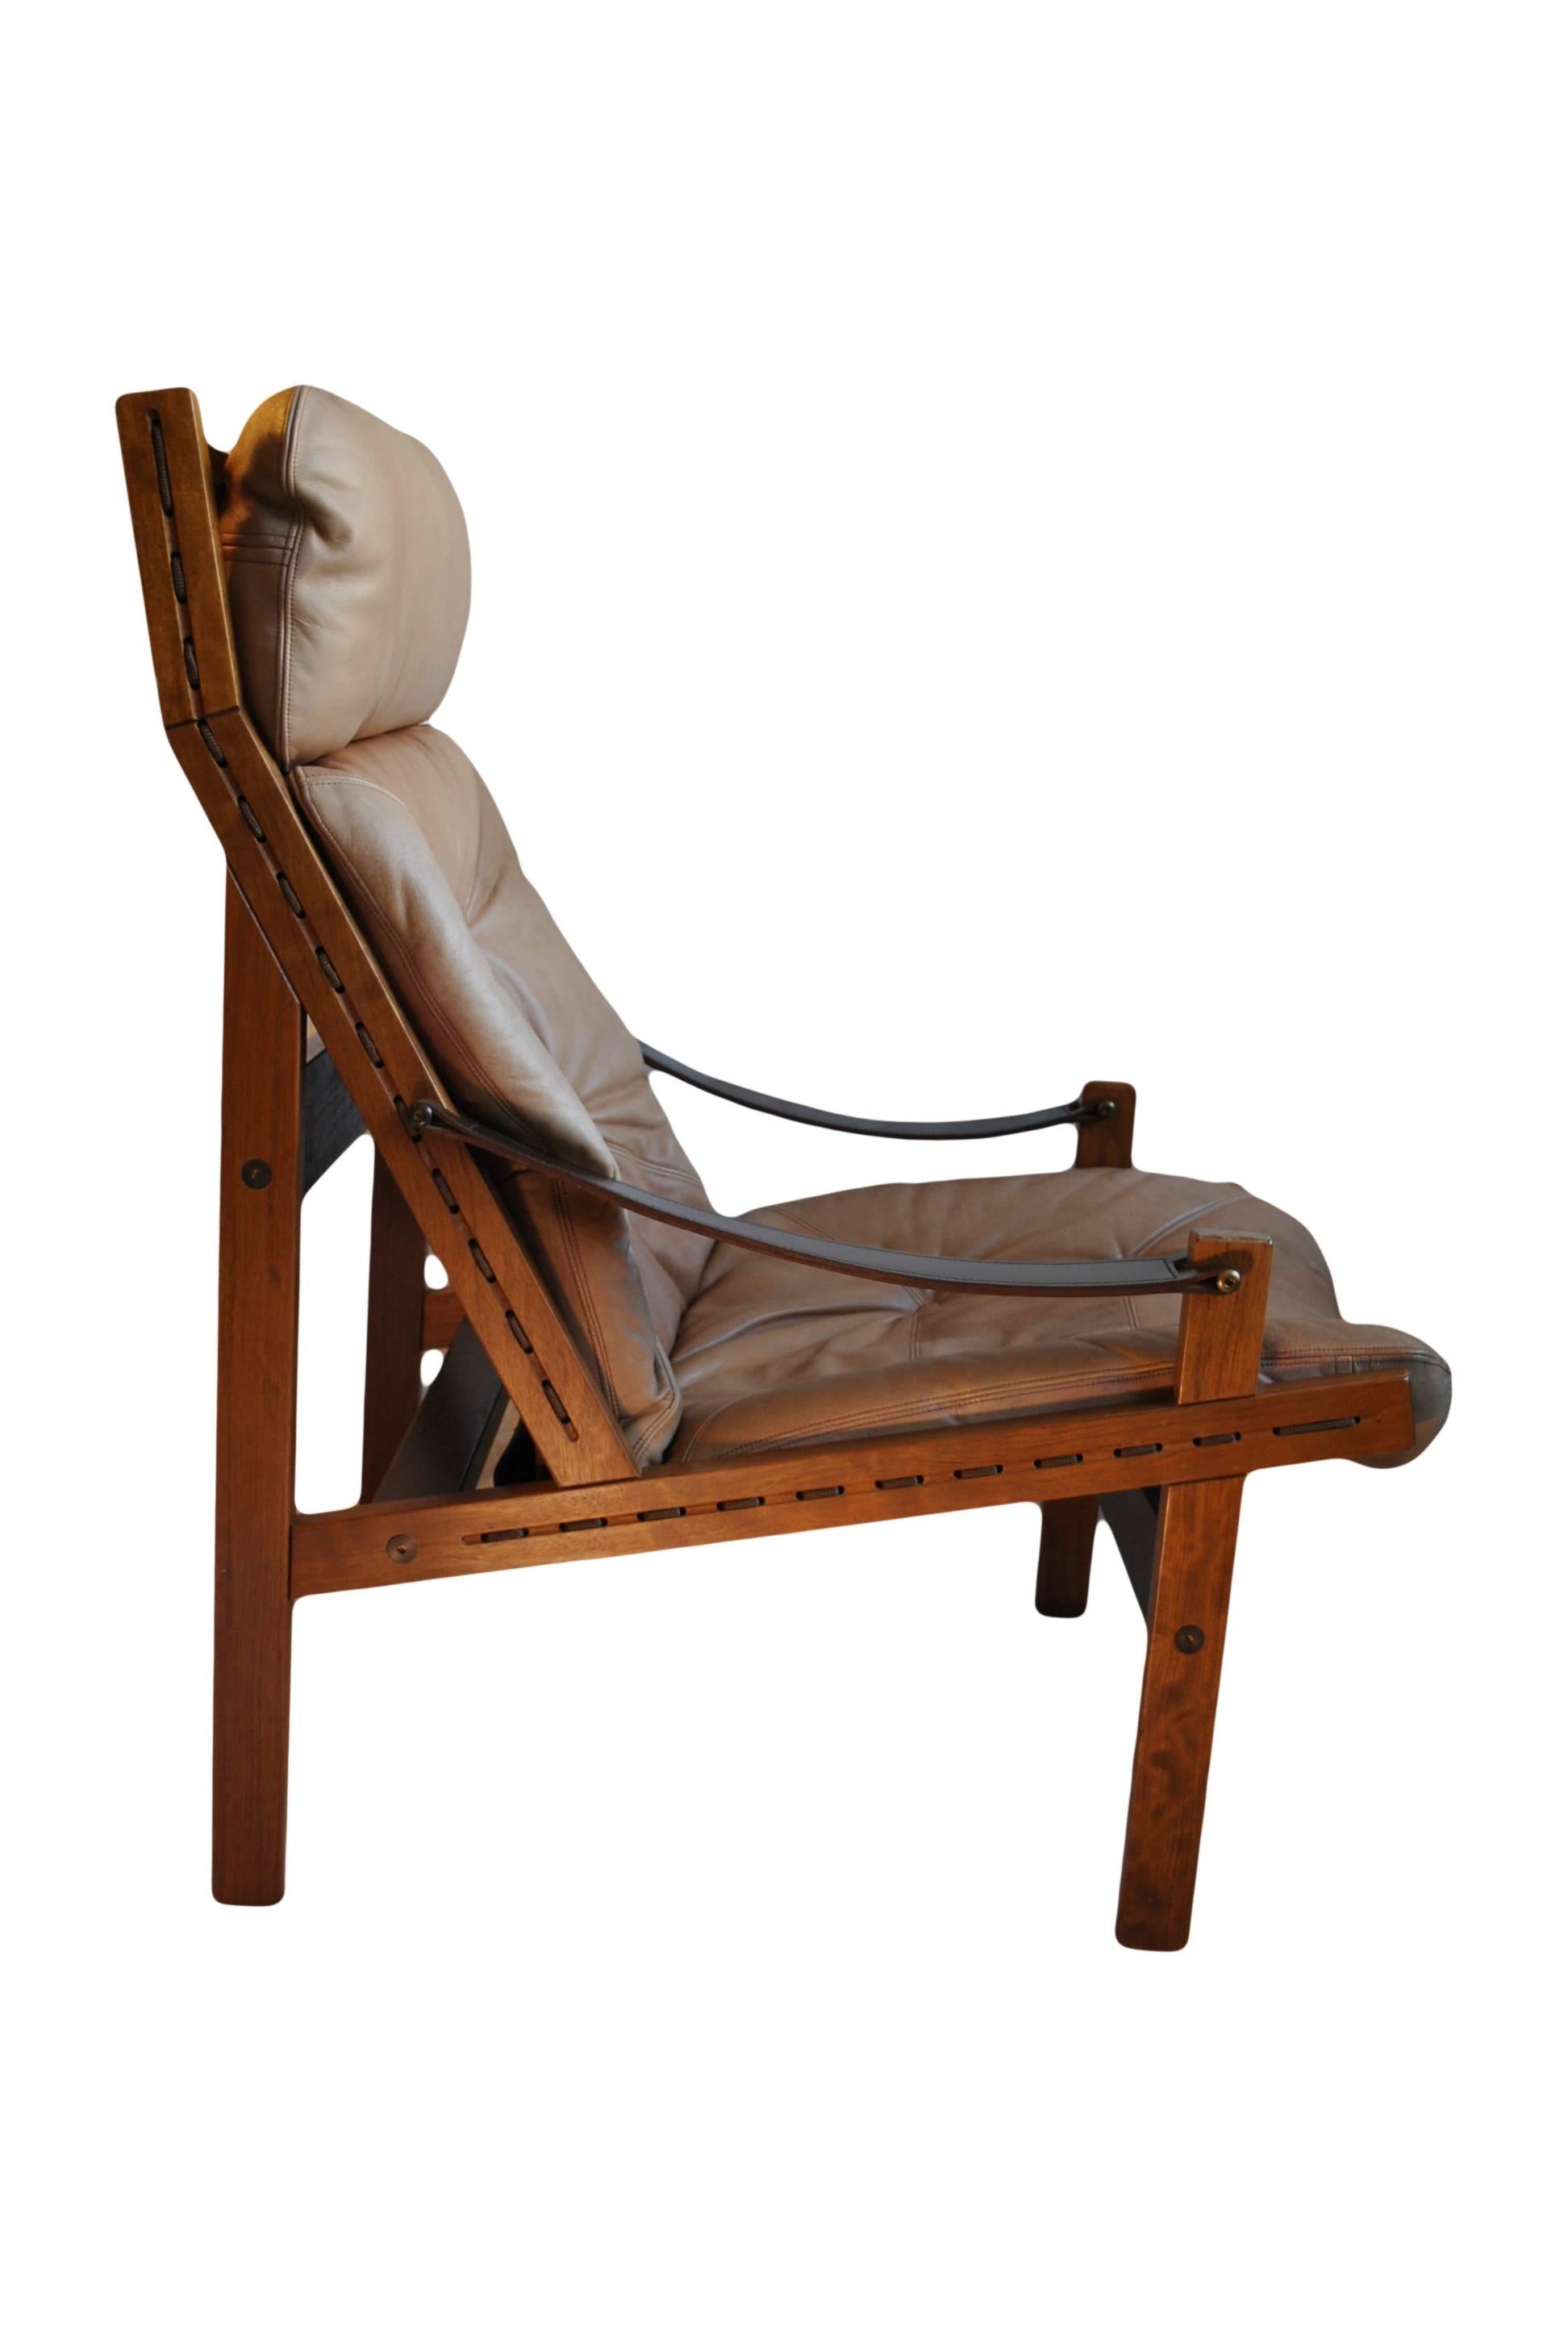 Tan Leather Hunter chair with Walnut frame. Designed by Torbjorn Afdal for Vatne Mobler, Norway, circa 1960.
Other examples available.